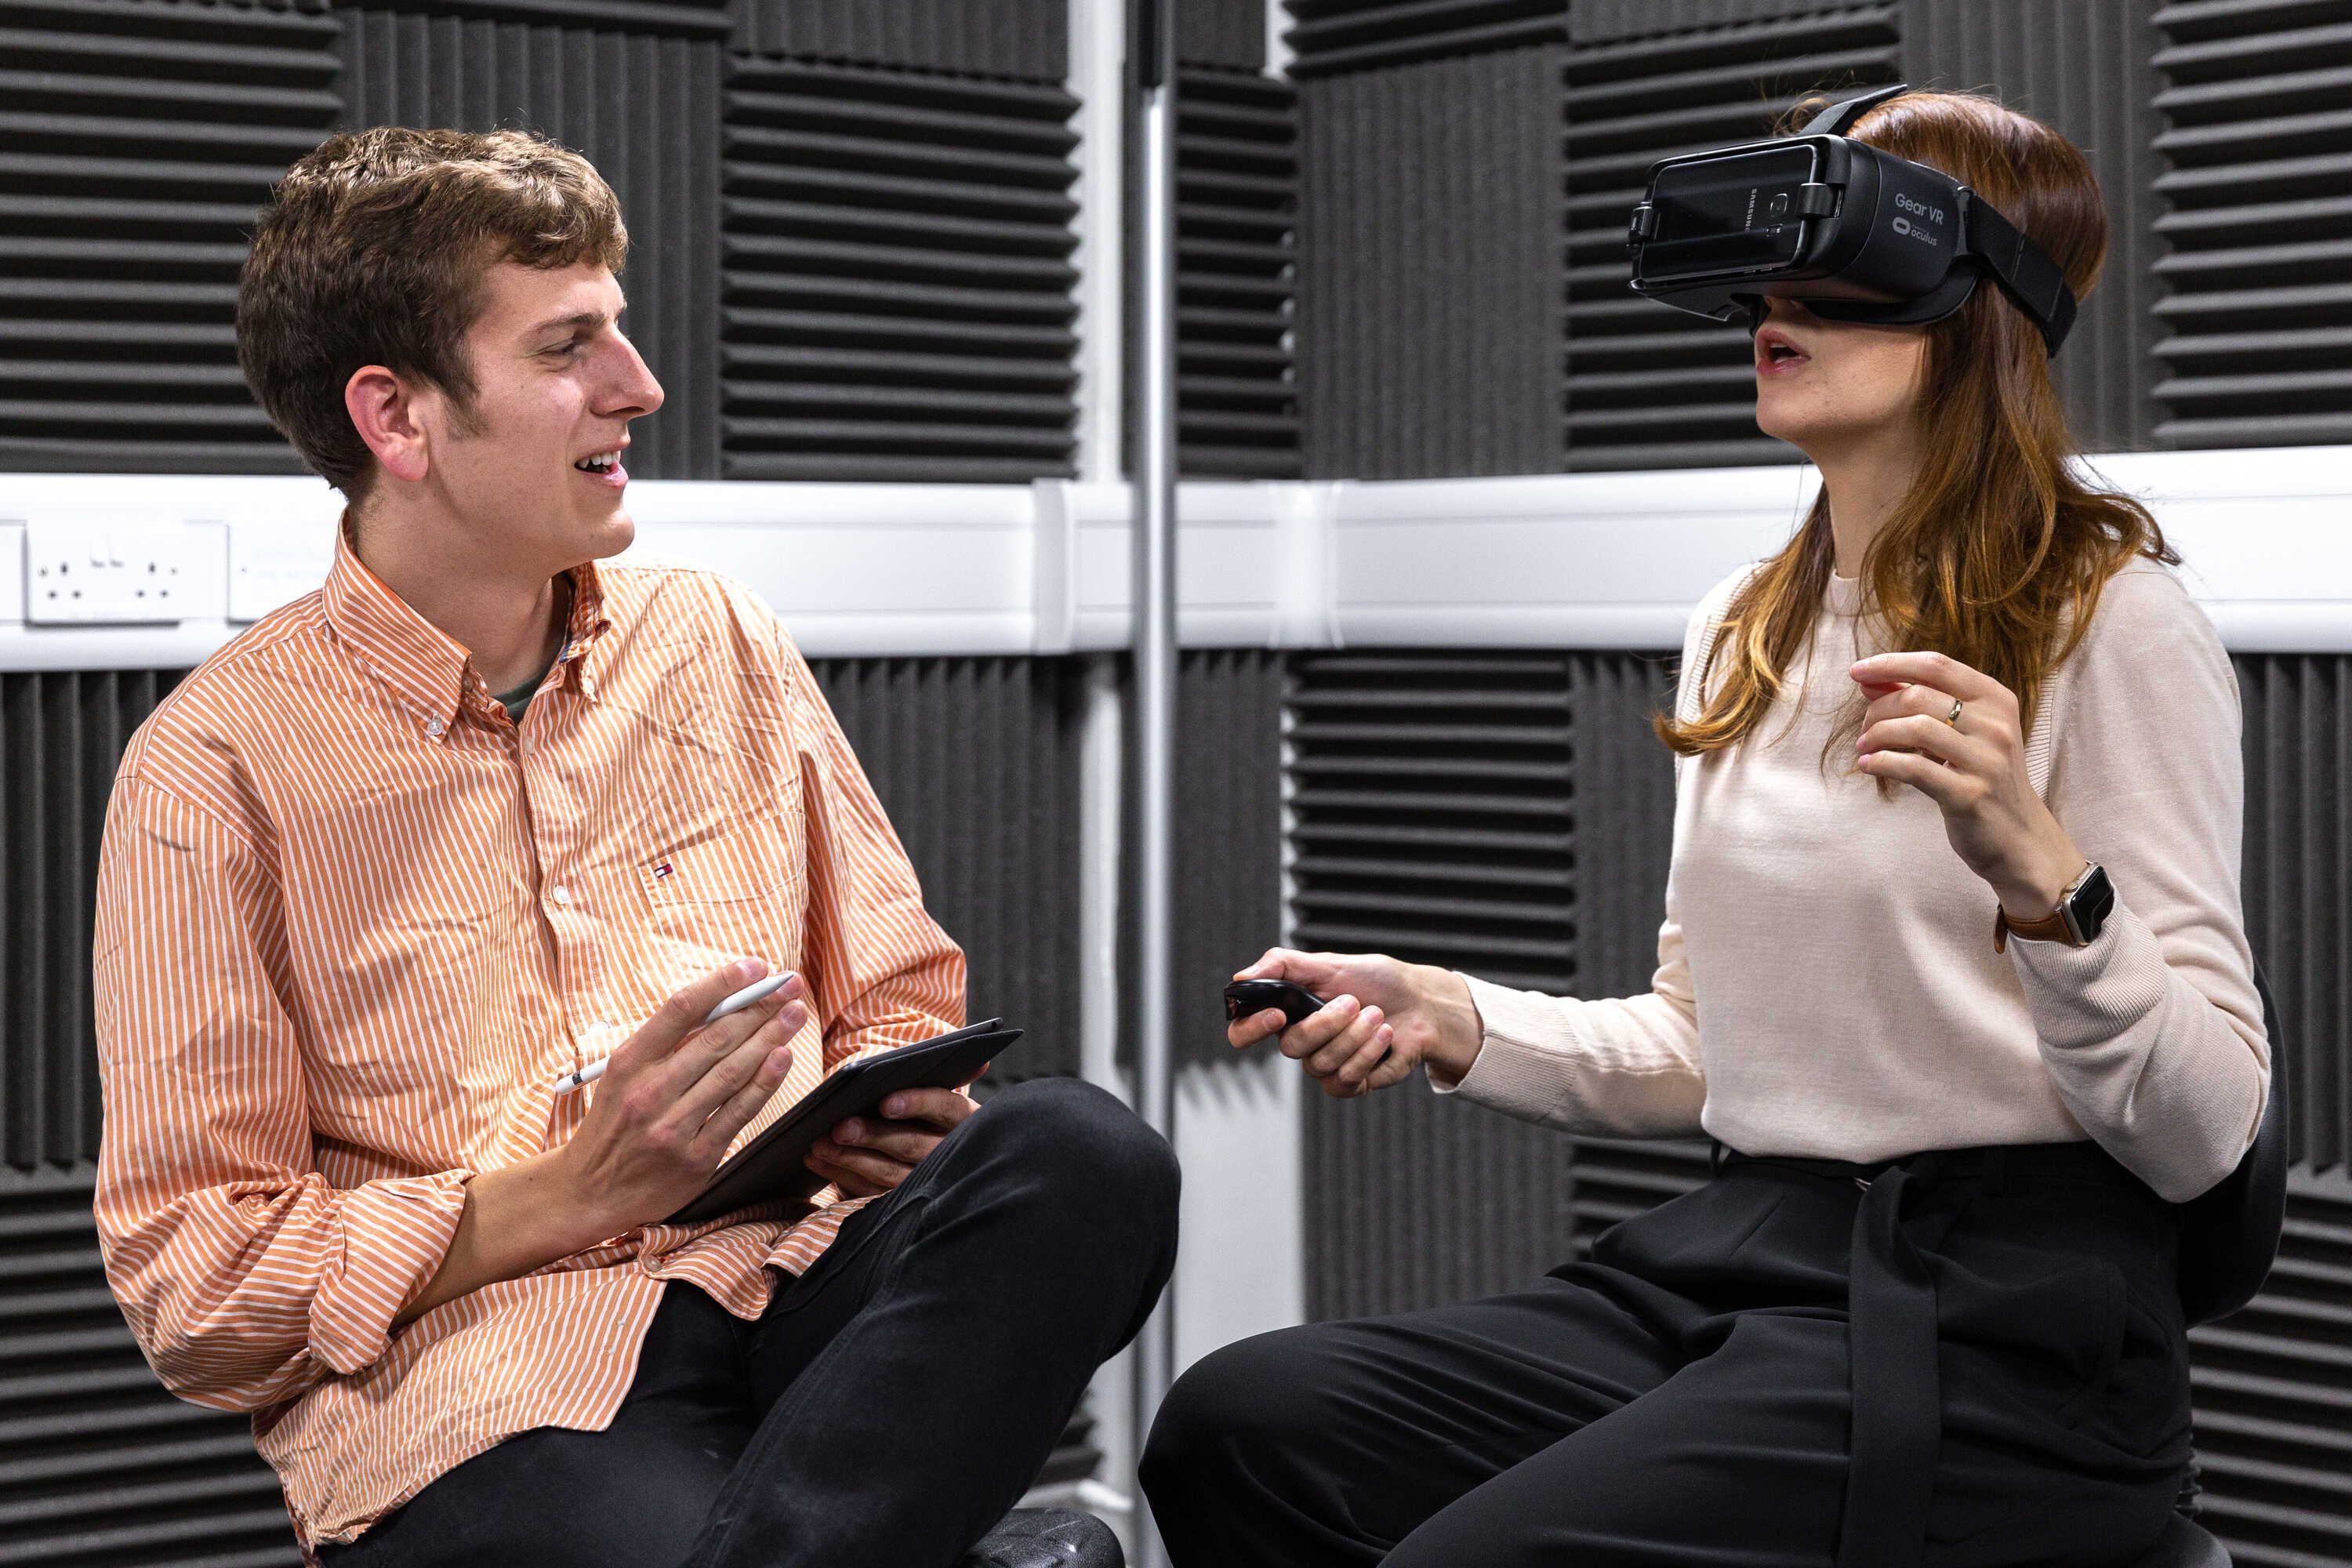 A male and female student sitting next to each other, the female student is wearing a virtual reality headset